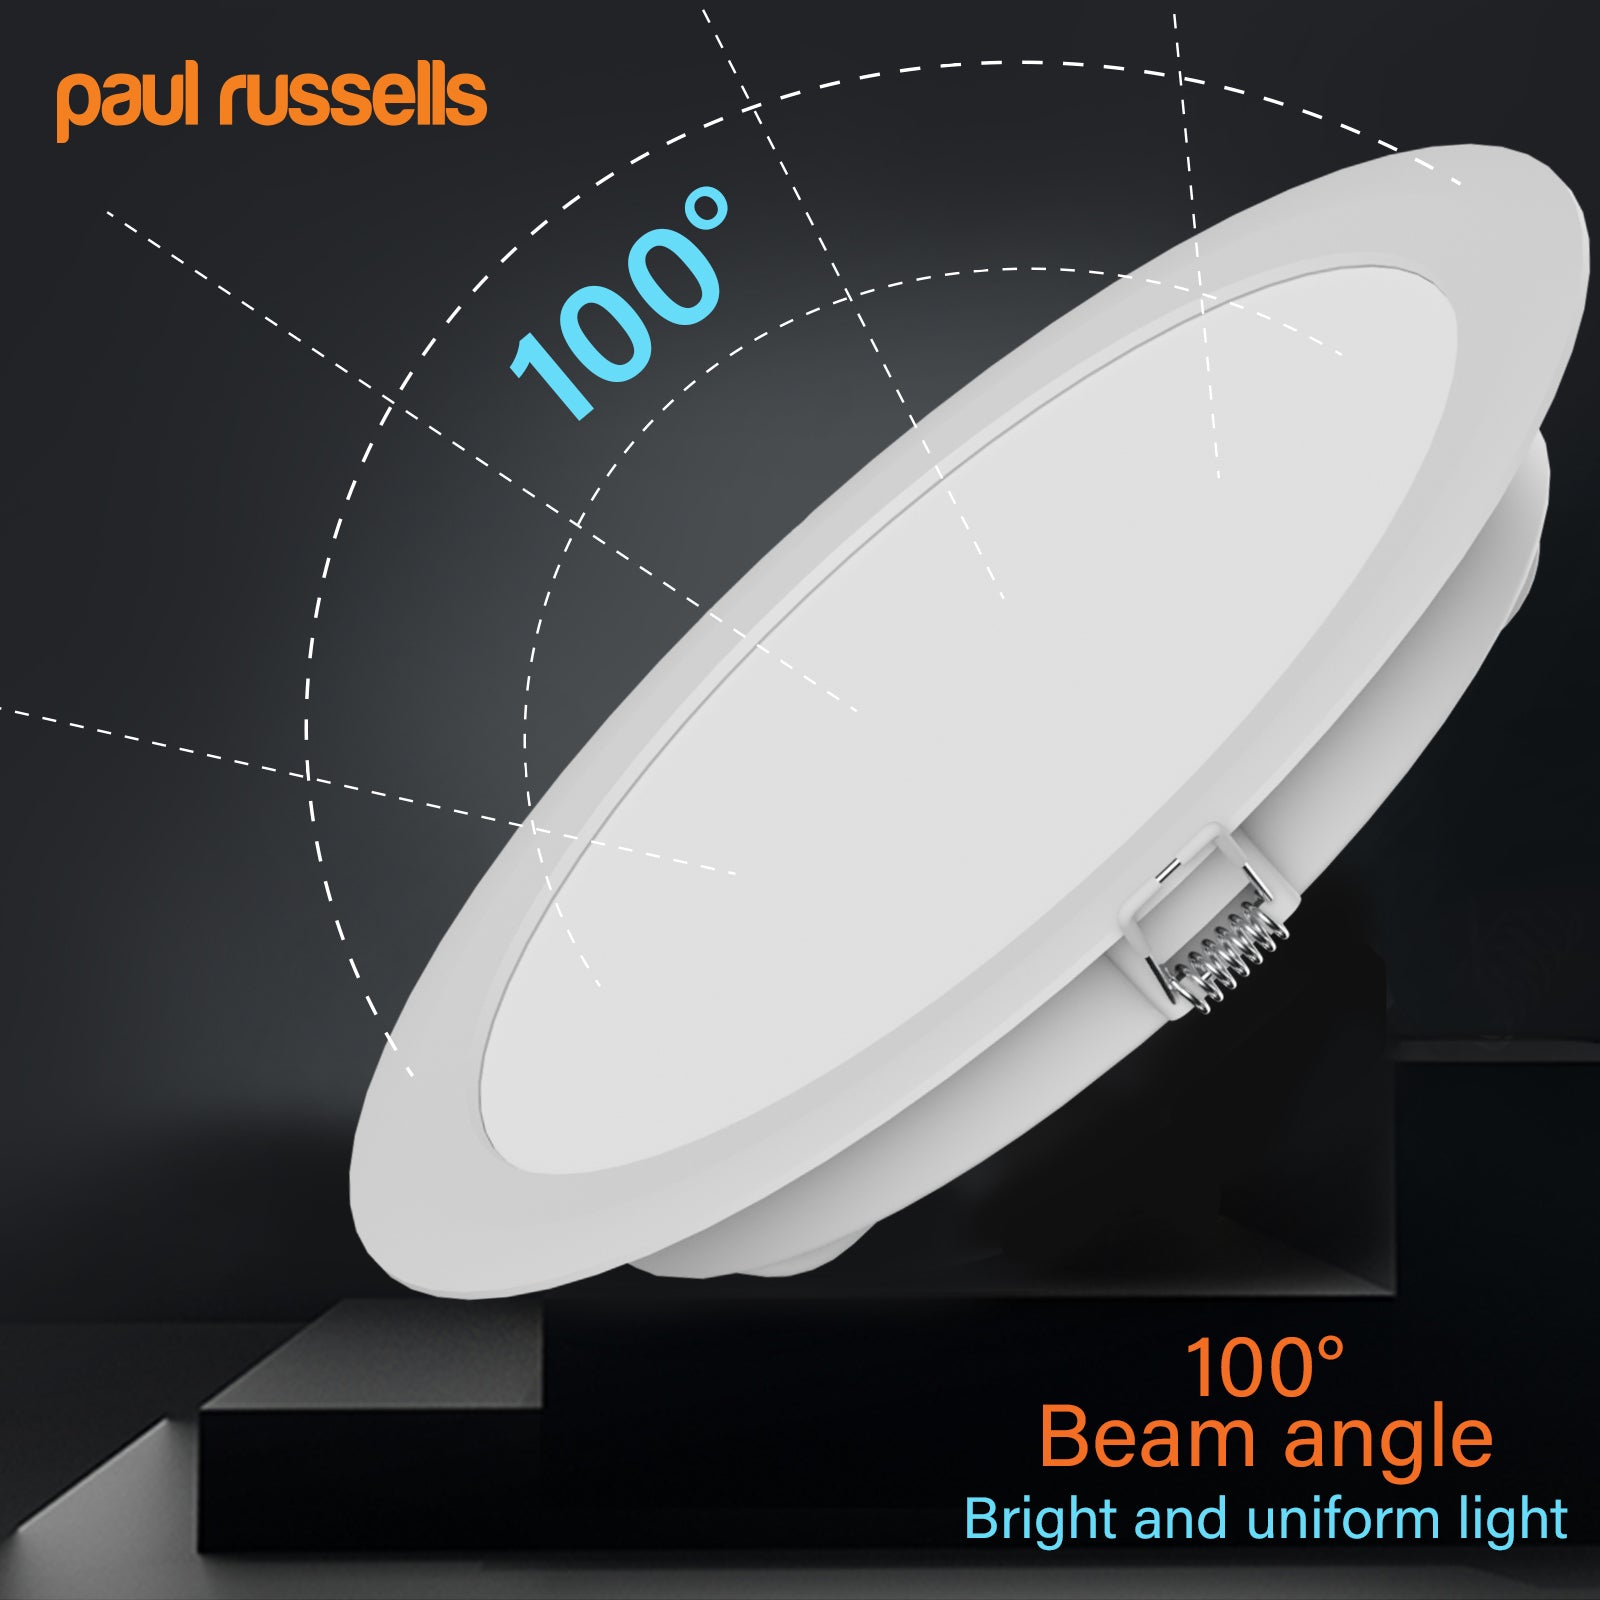 24W, LED Round Ceiling Downlights, 2450 Lumens, 6500K Day Light, Non-Dimmable Panel Spotlights